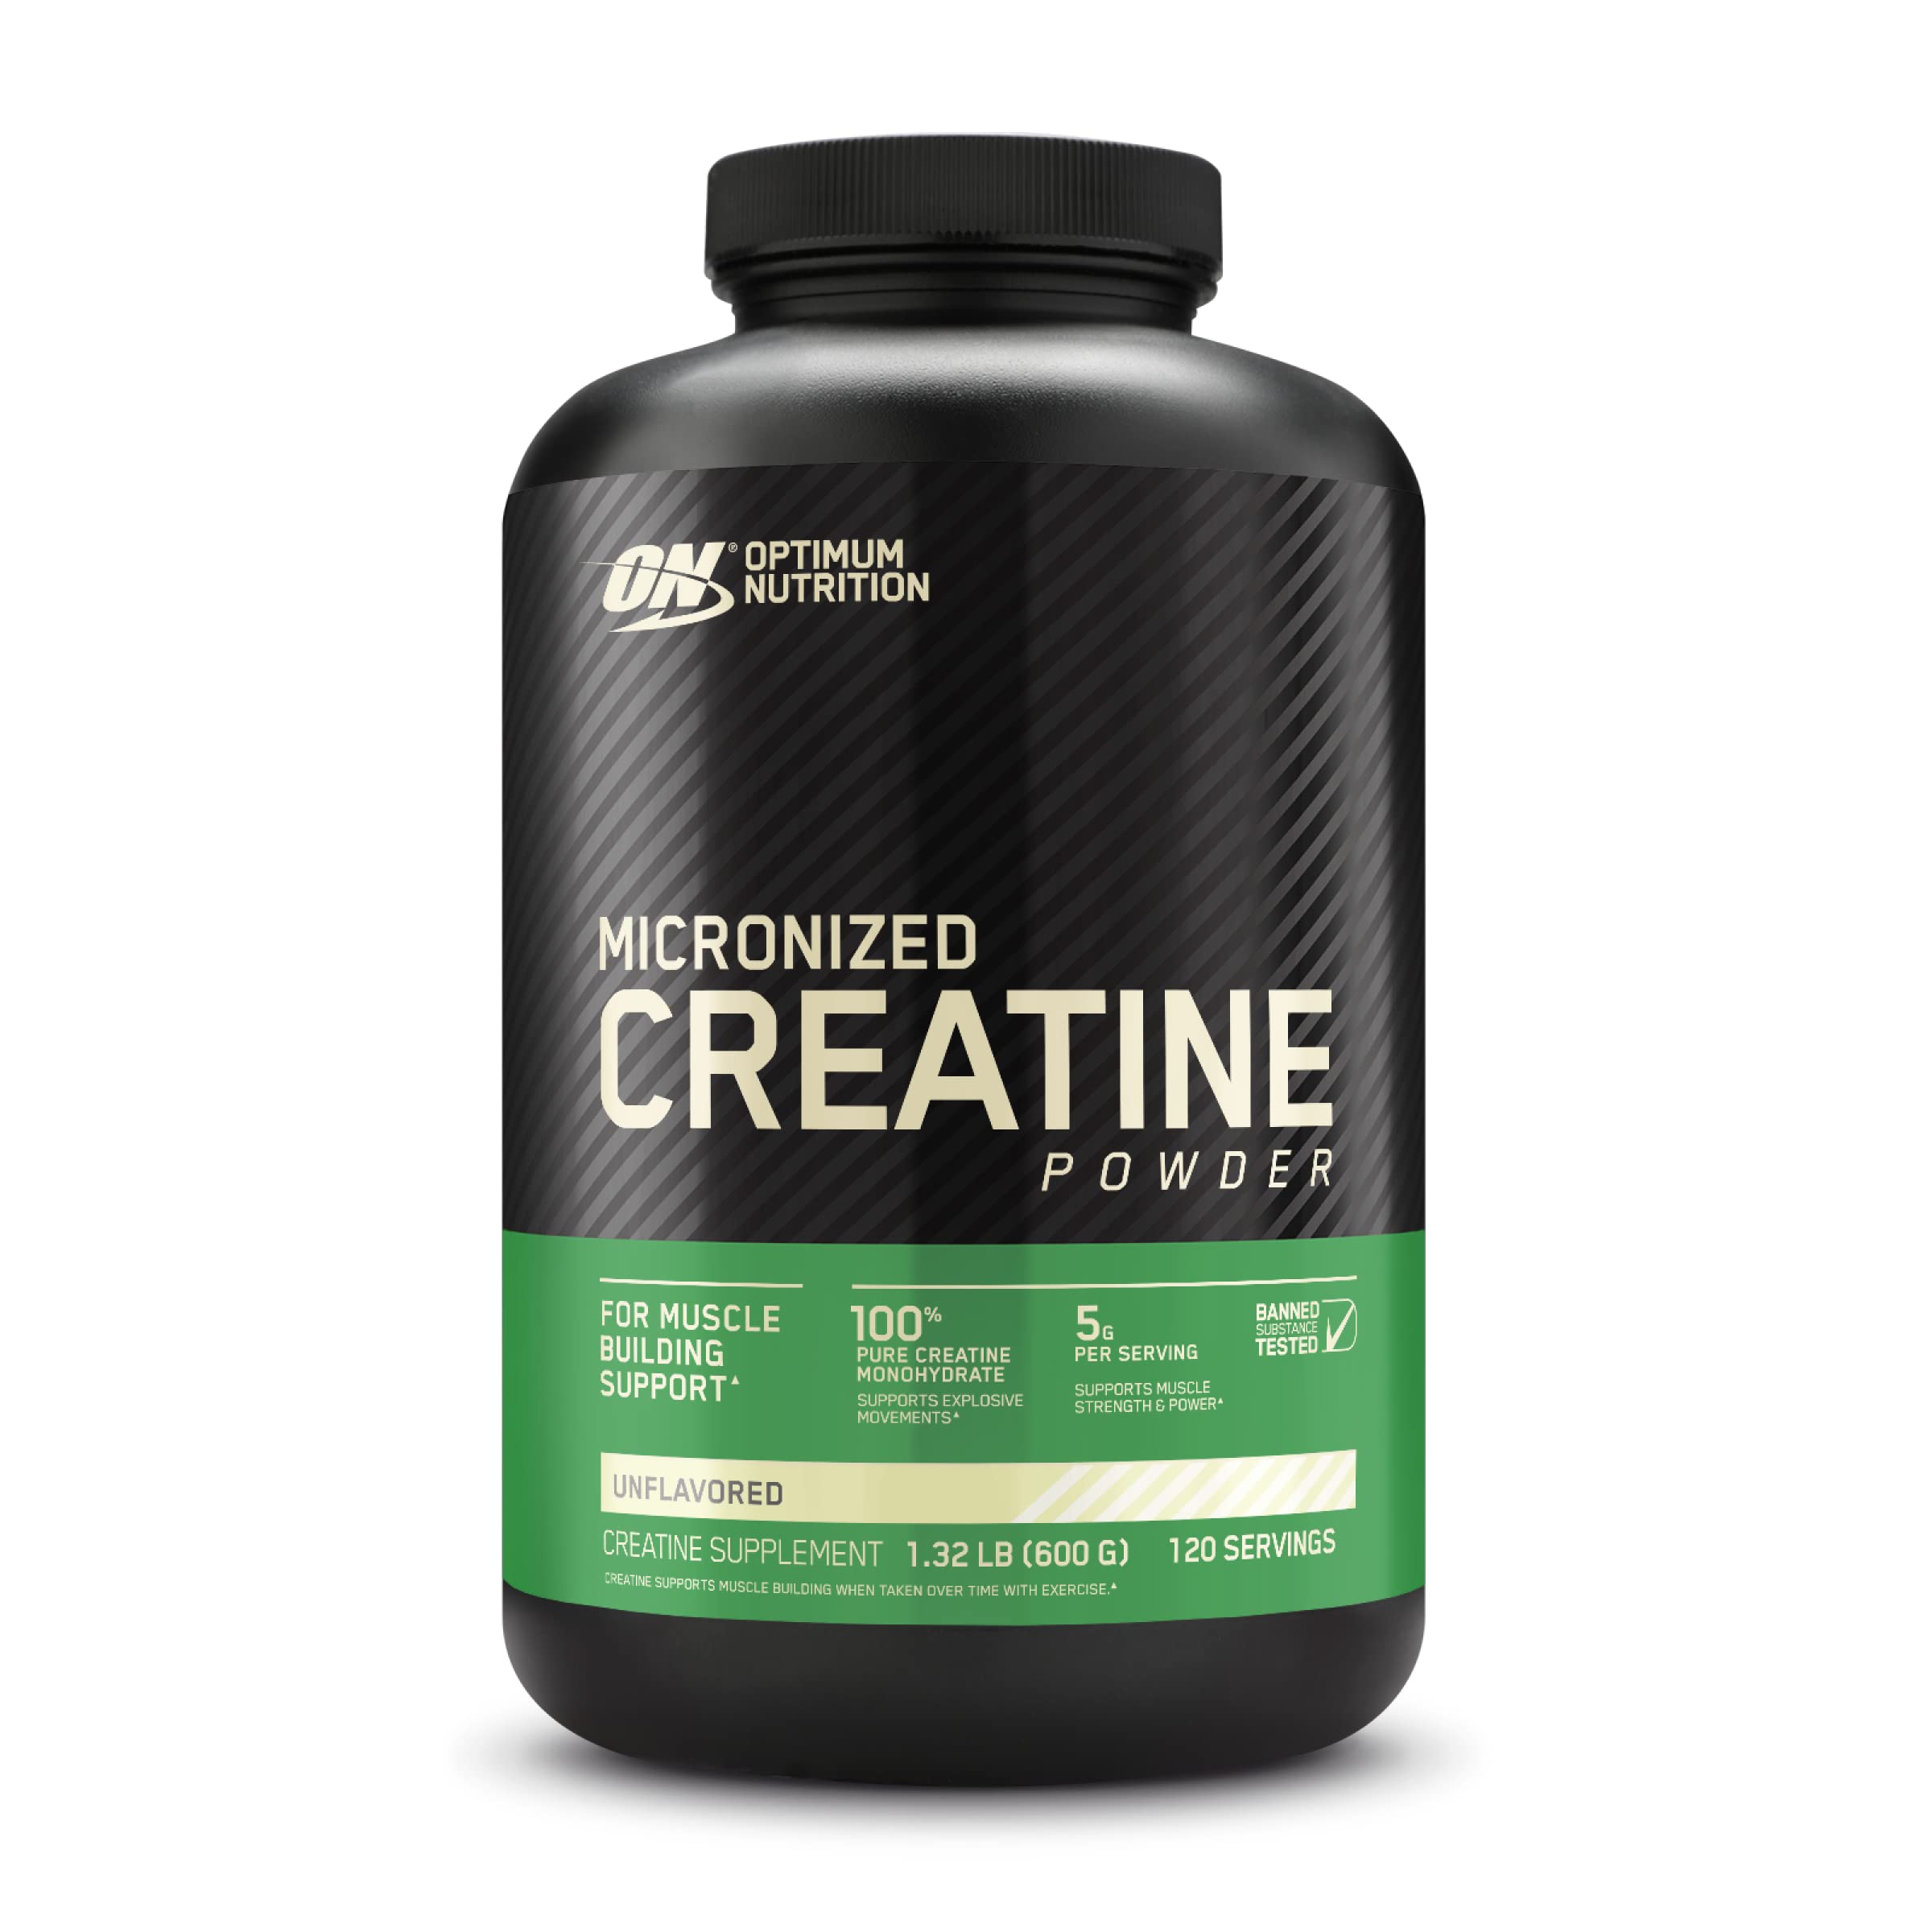 Optimum Nutrition L-Glutamine Muscle Recovery Capsules, 1000mg, 240 Count (Package May Vary) & Micronized Creatine Monohydrate Powder, Unflavored, Keto Friendly, 120 Servings (P